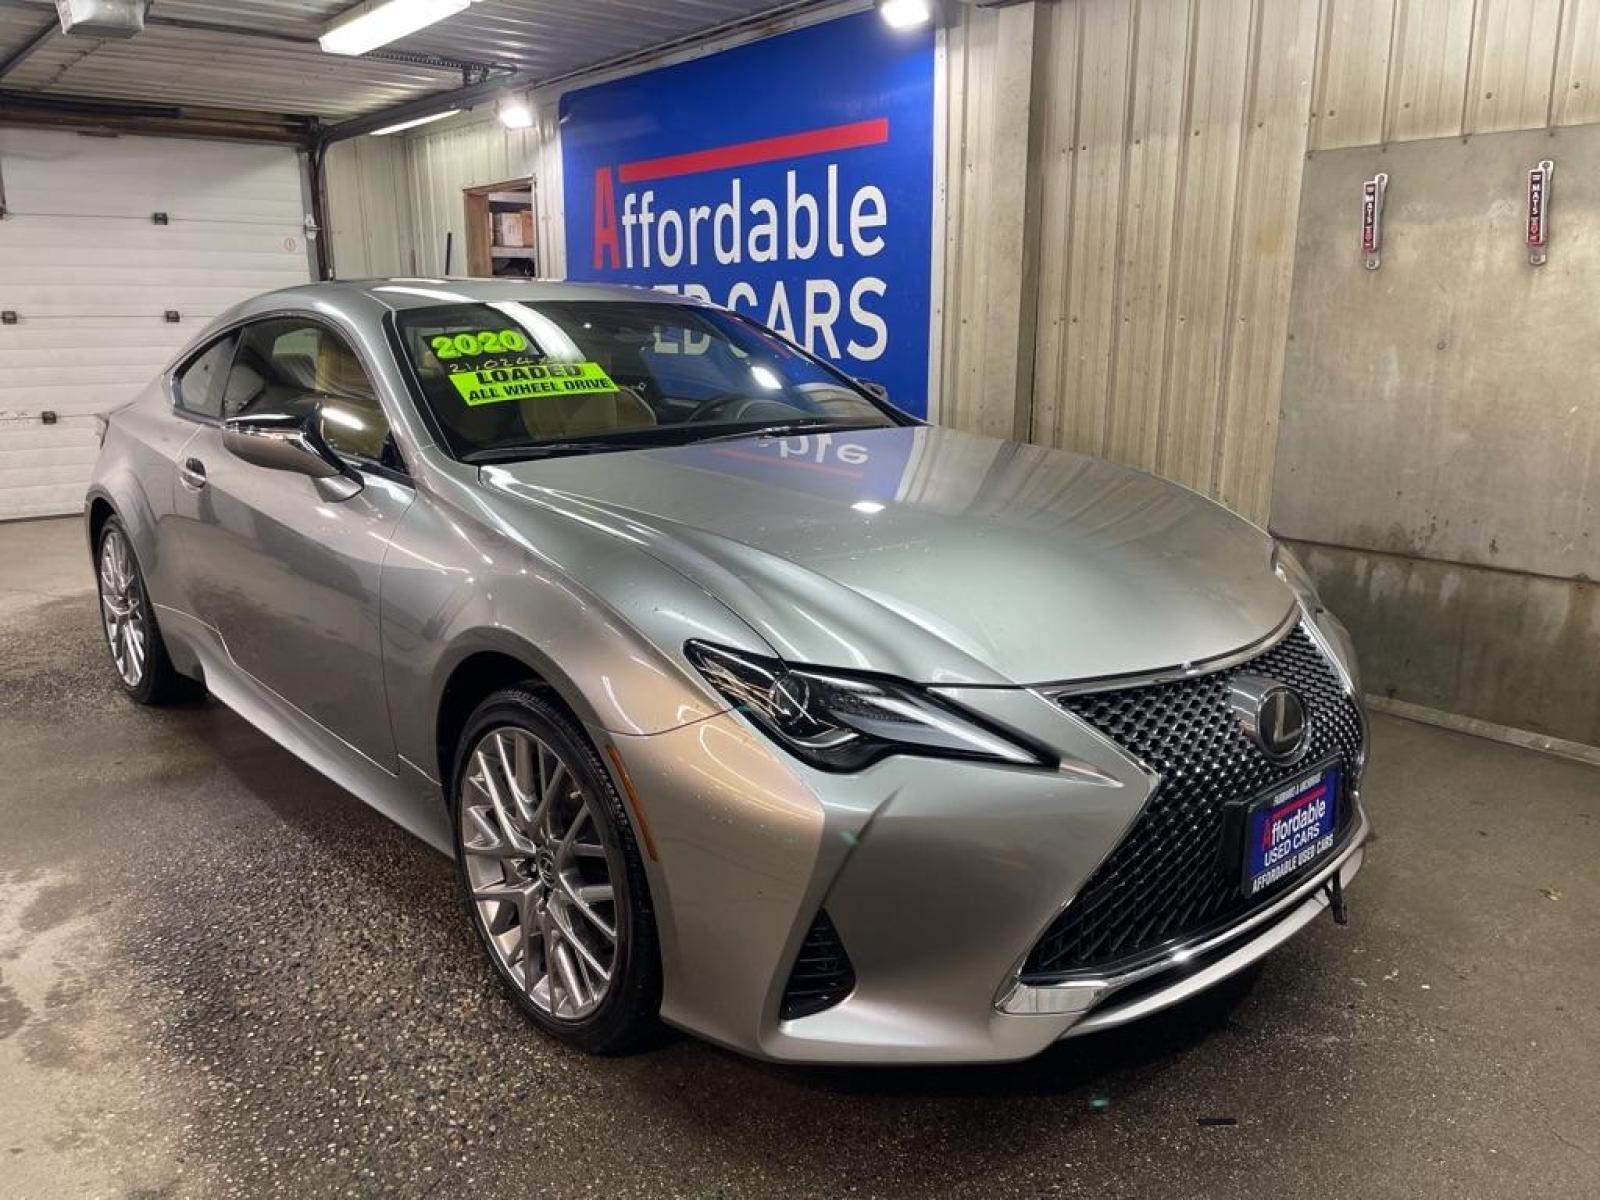 Affordable Used Cars, Fairbanks - 2020 LEXUS RC 2DR